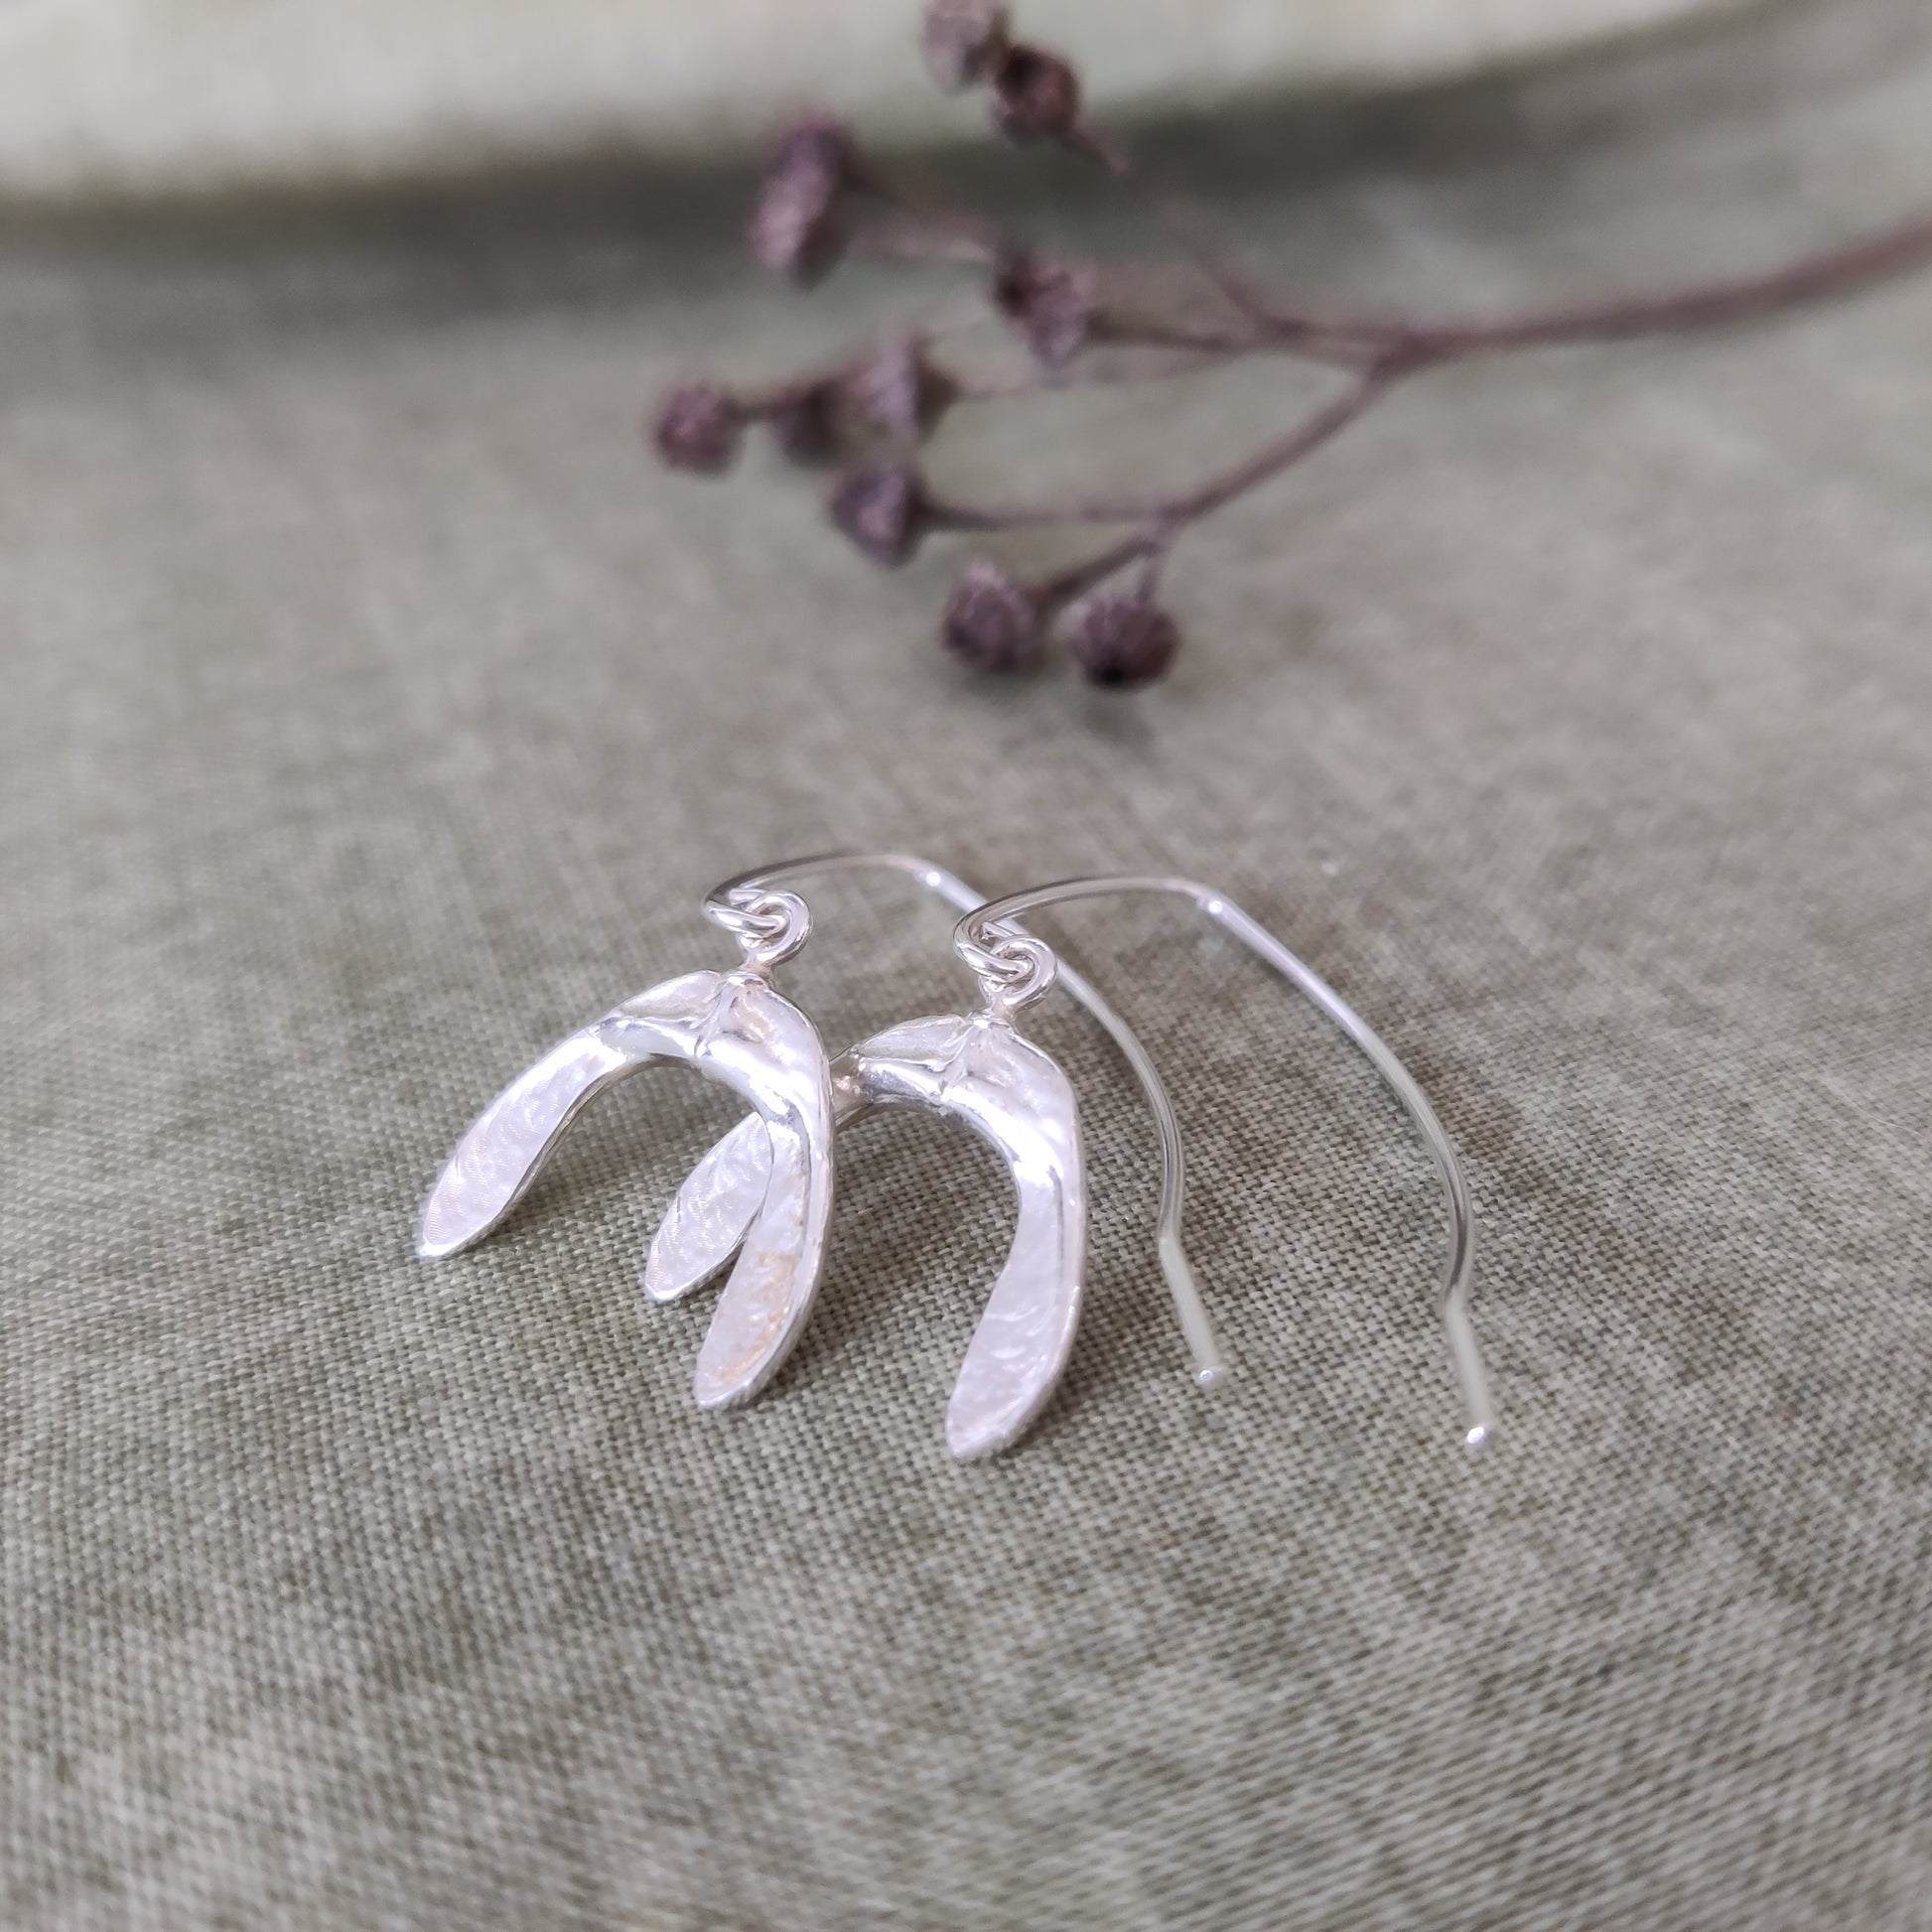 Sycamore drop earrings handcrafted in 925 sterling silver